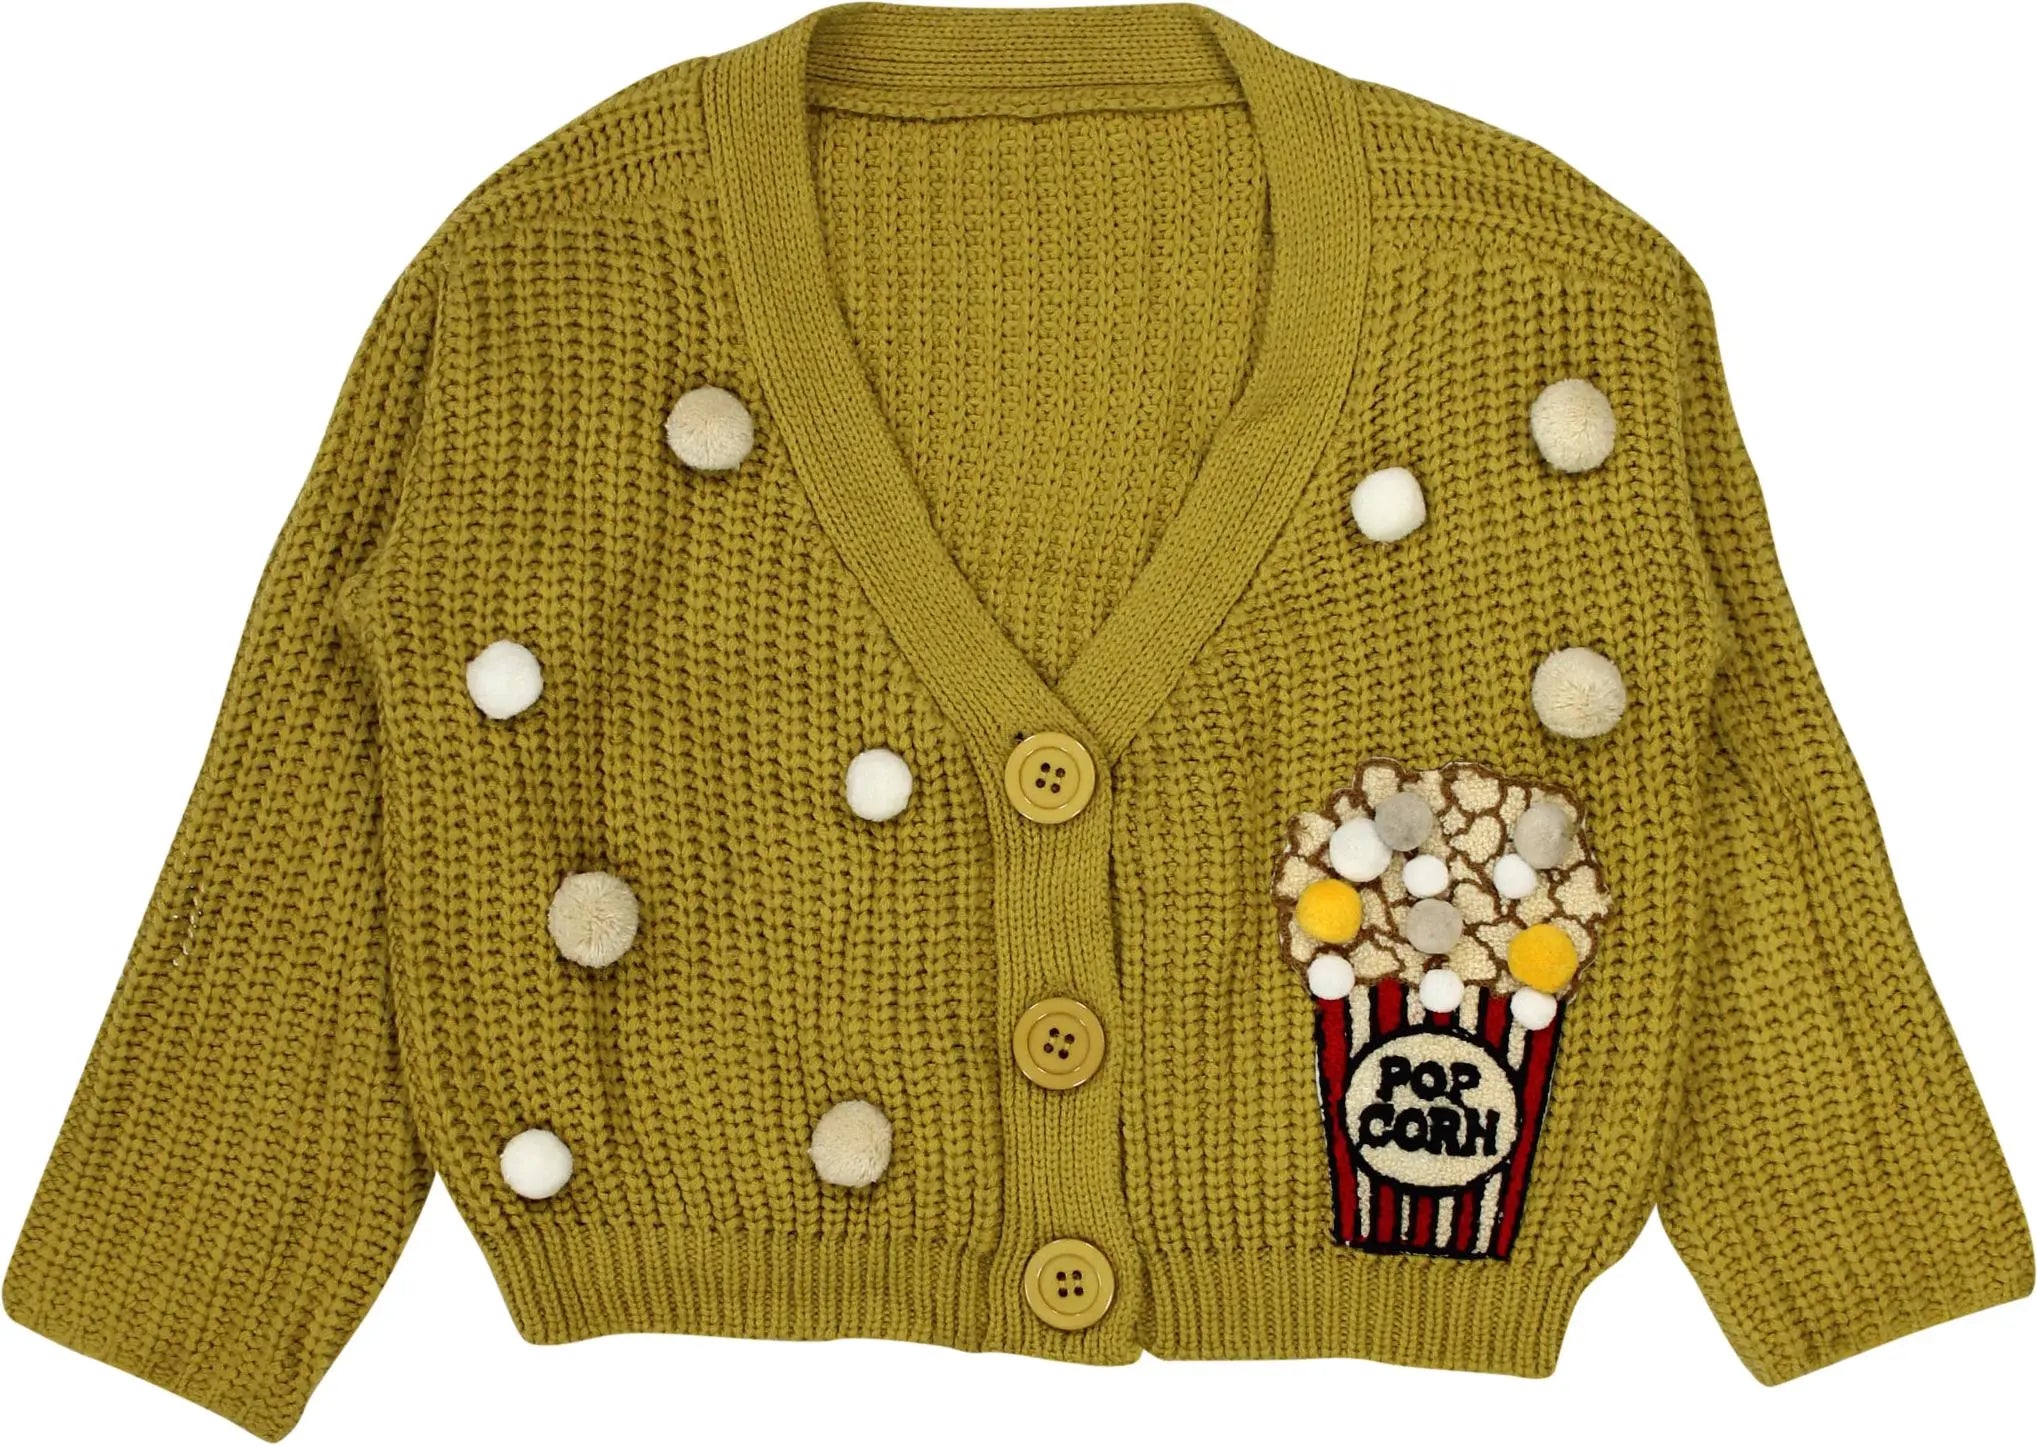 Unknown - 'Popcorn' Cardigan- ThriftTale.com - Vintage and second handclothing